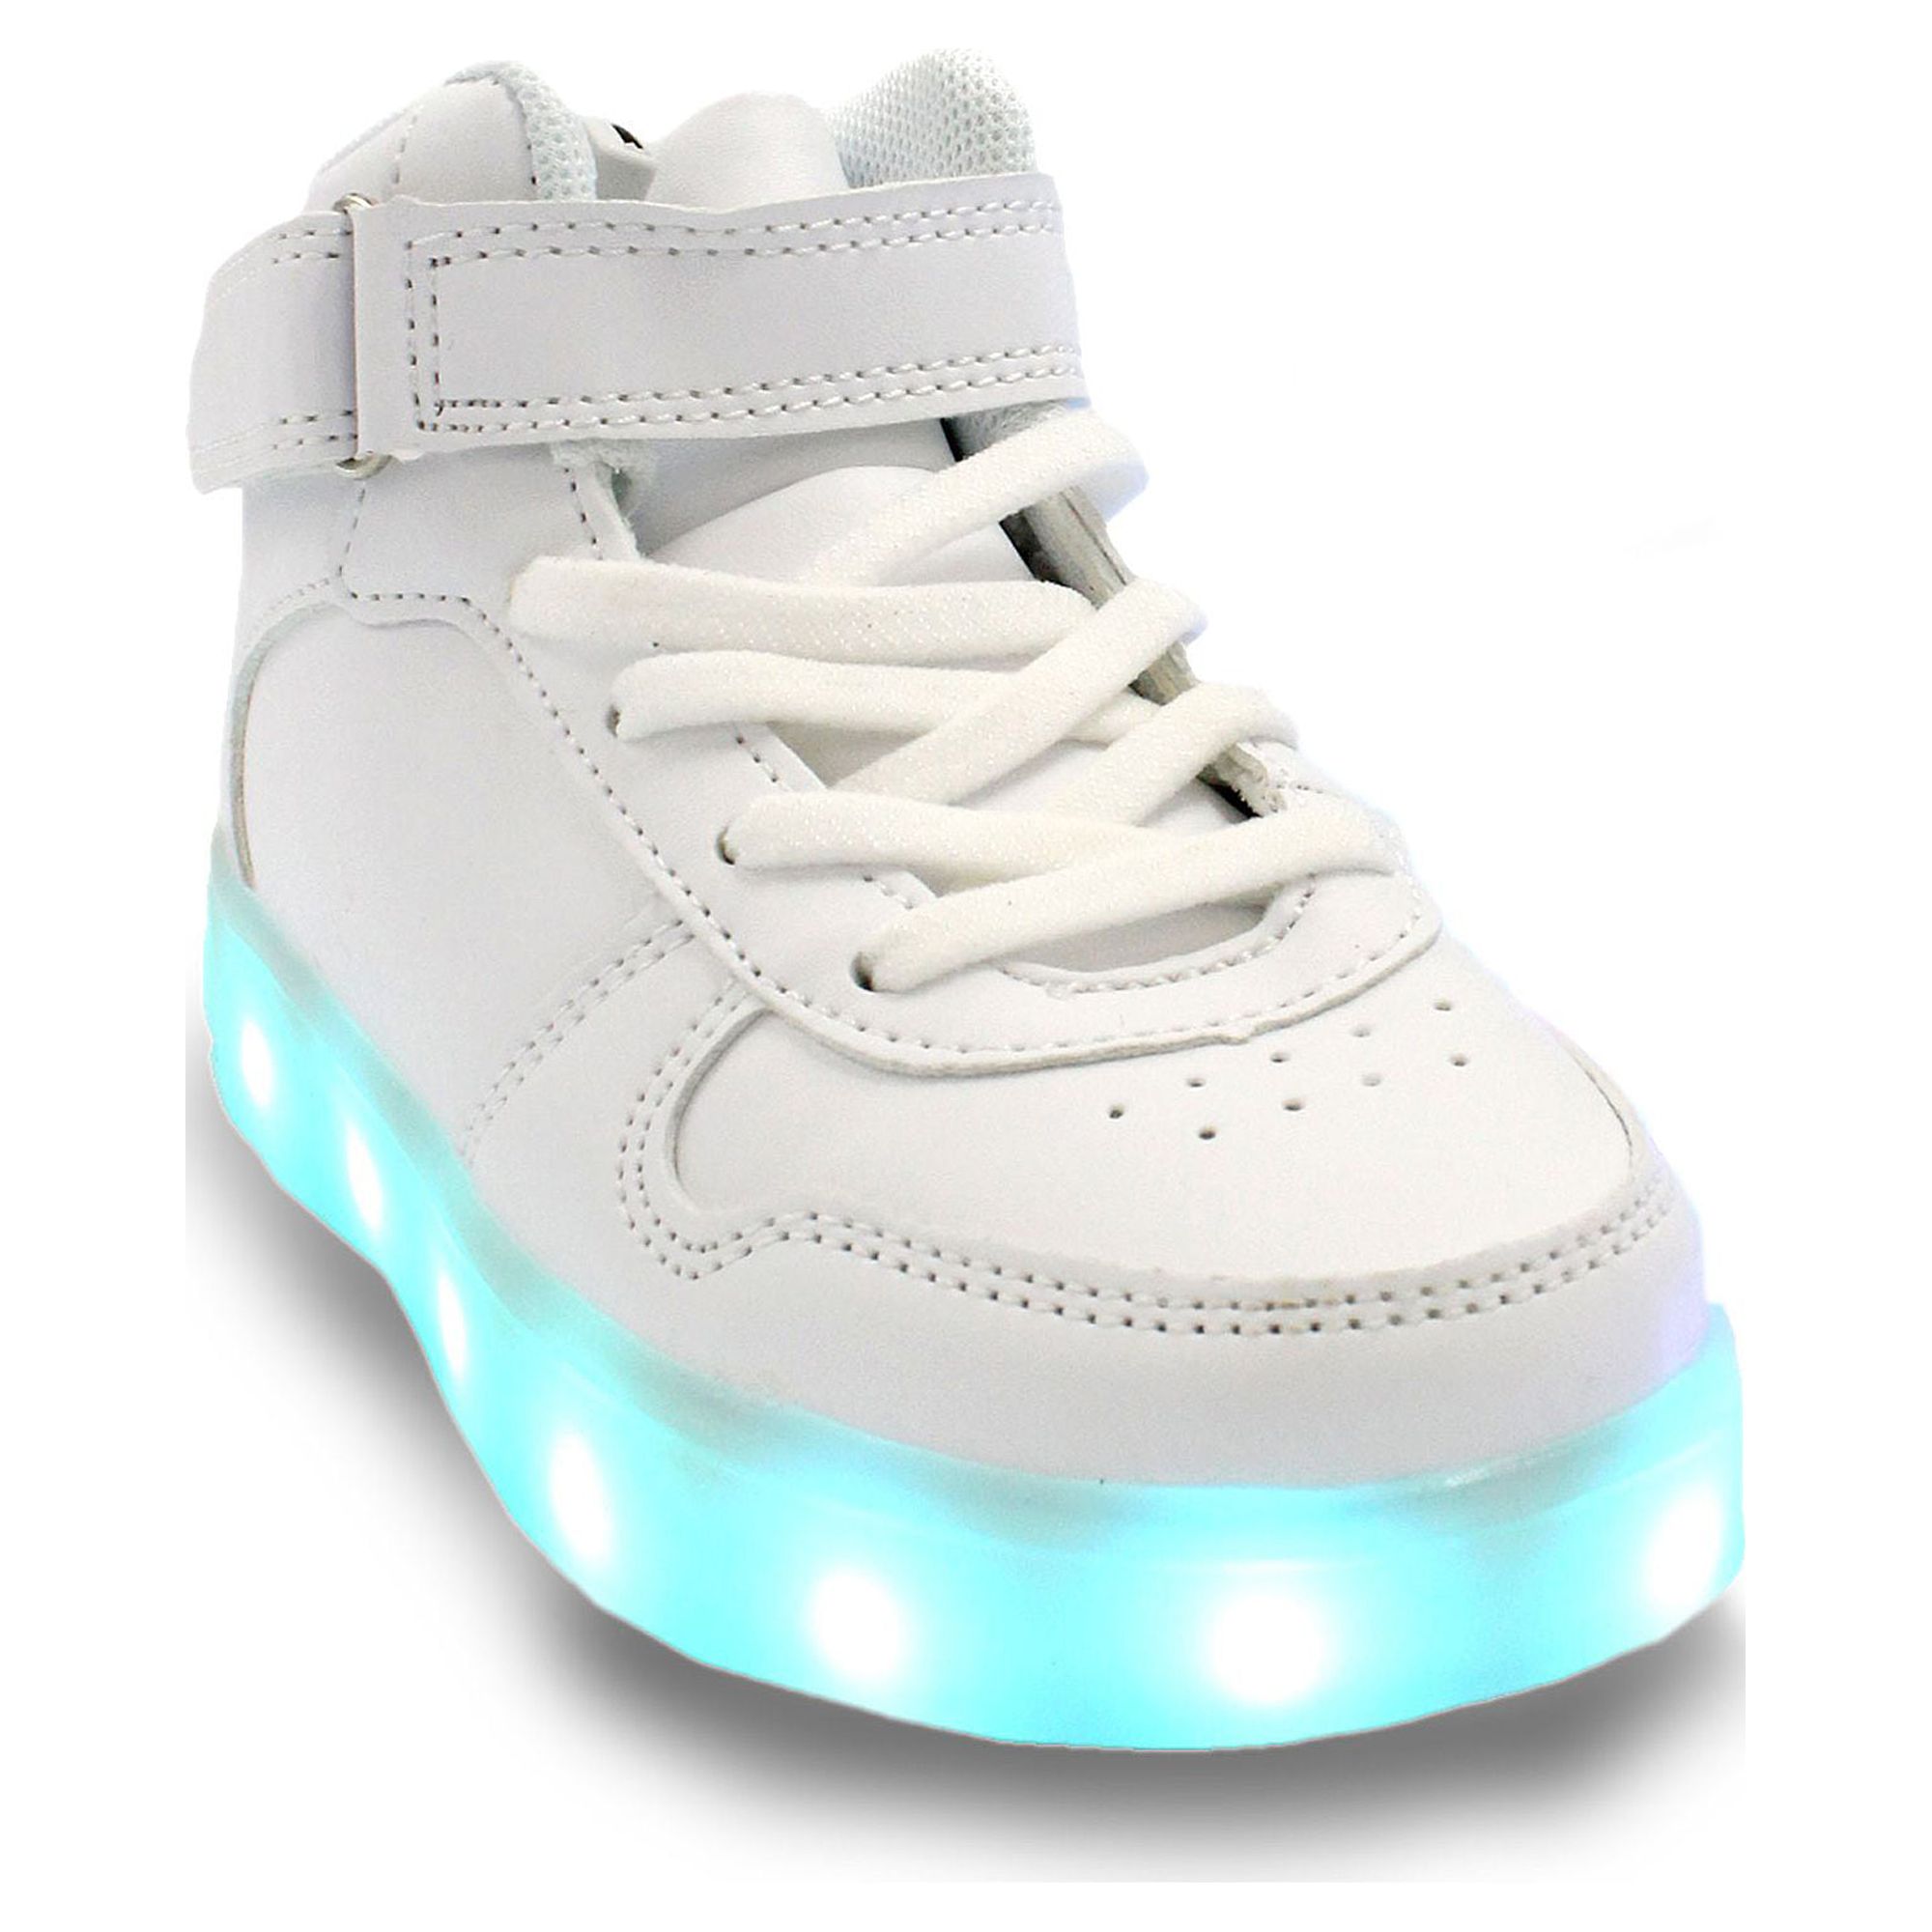 Family Smiles LED Light Up Sneakers Kids High Top Boys Girls Unisex Strap Lace Up Shoes White Toddler US 10.5 / EU 27.5 - image 4 of 7